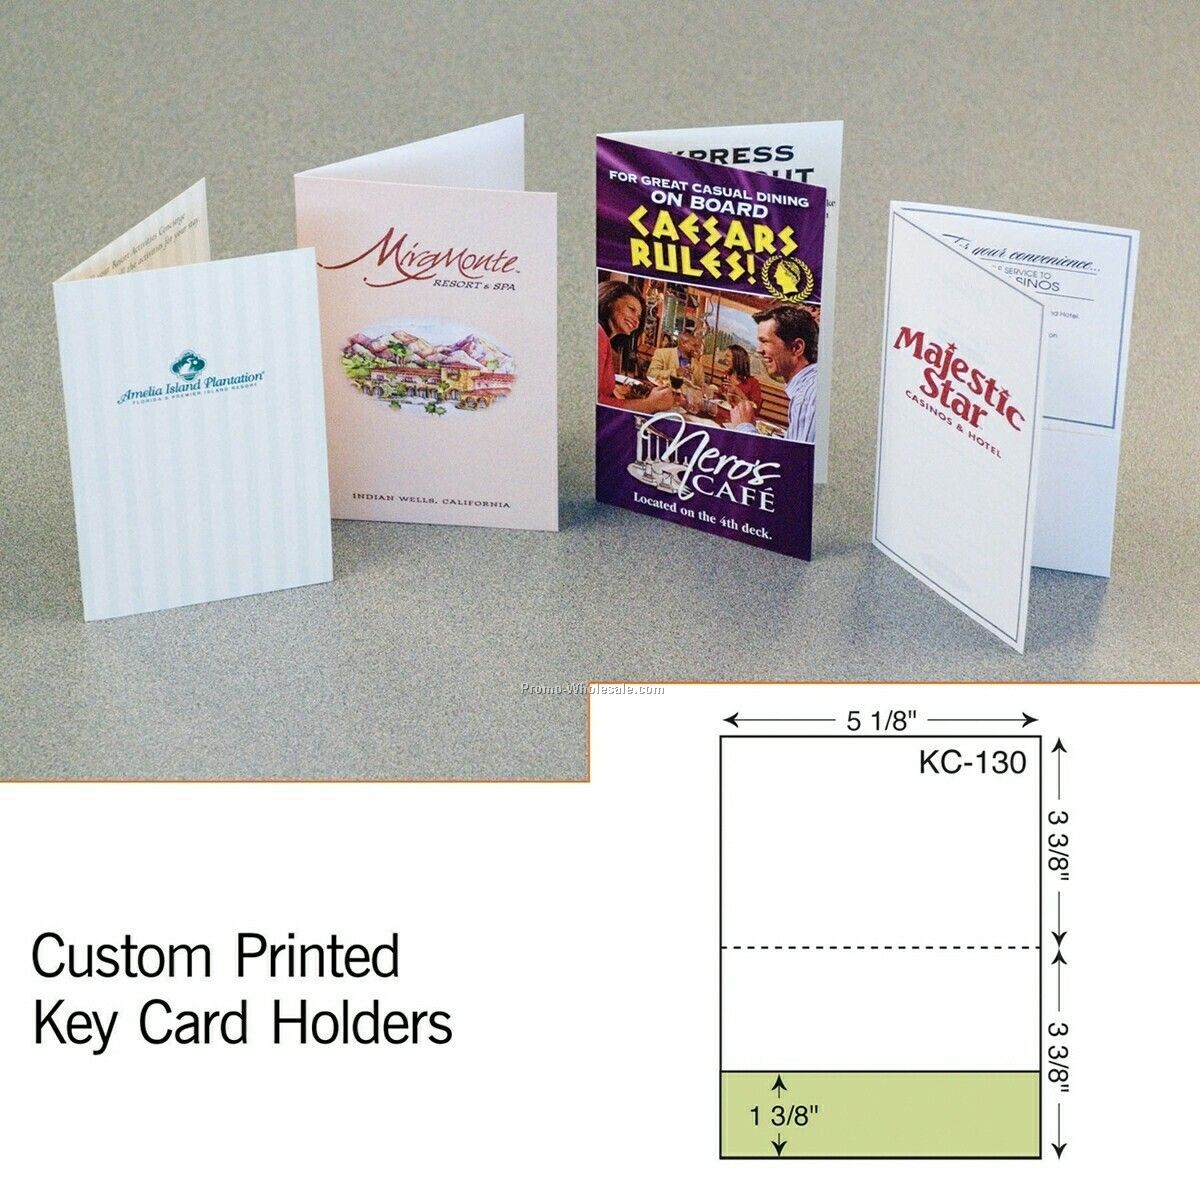 2-3/4"x4-1/2" Key Card W/ Curved Right Pocket (2 Color)